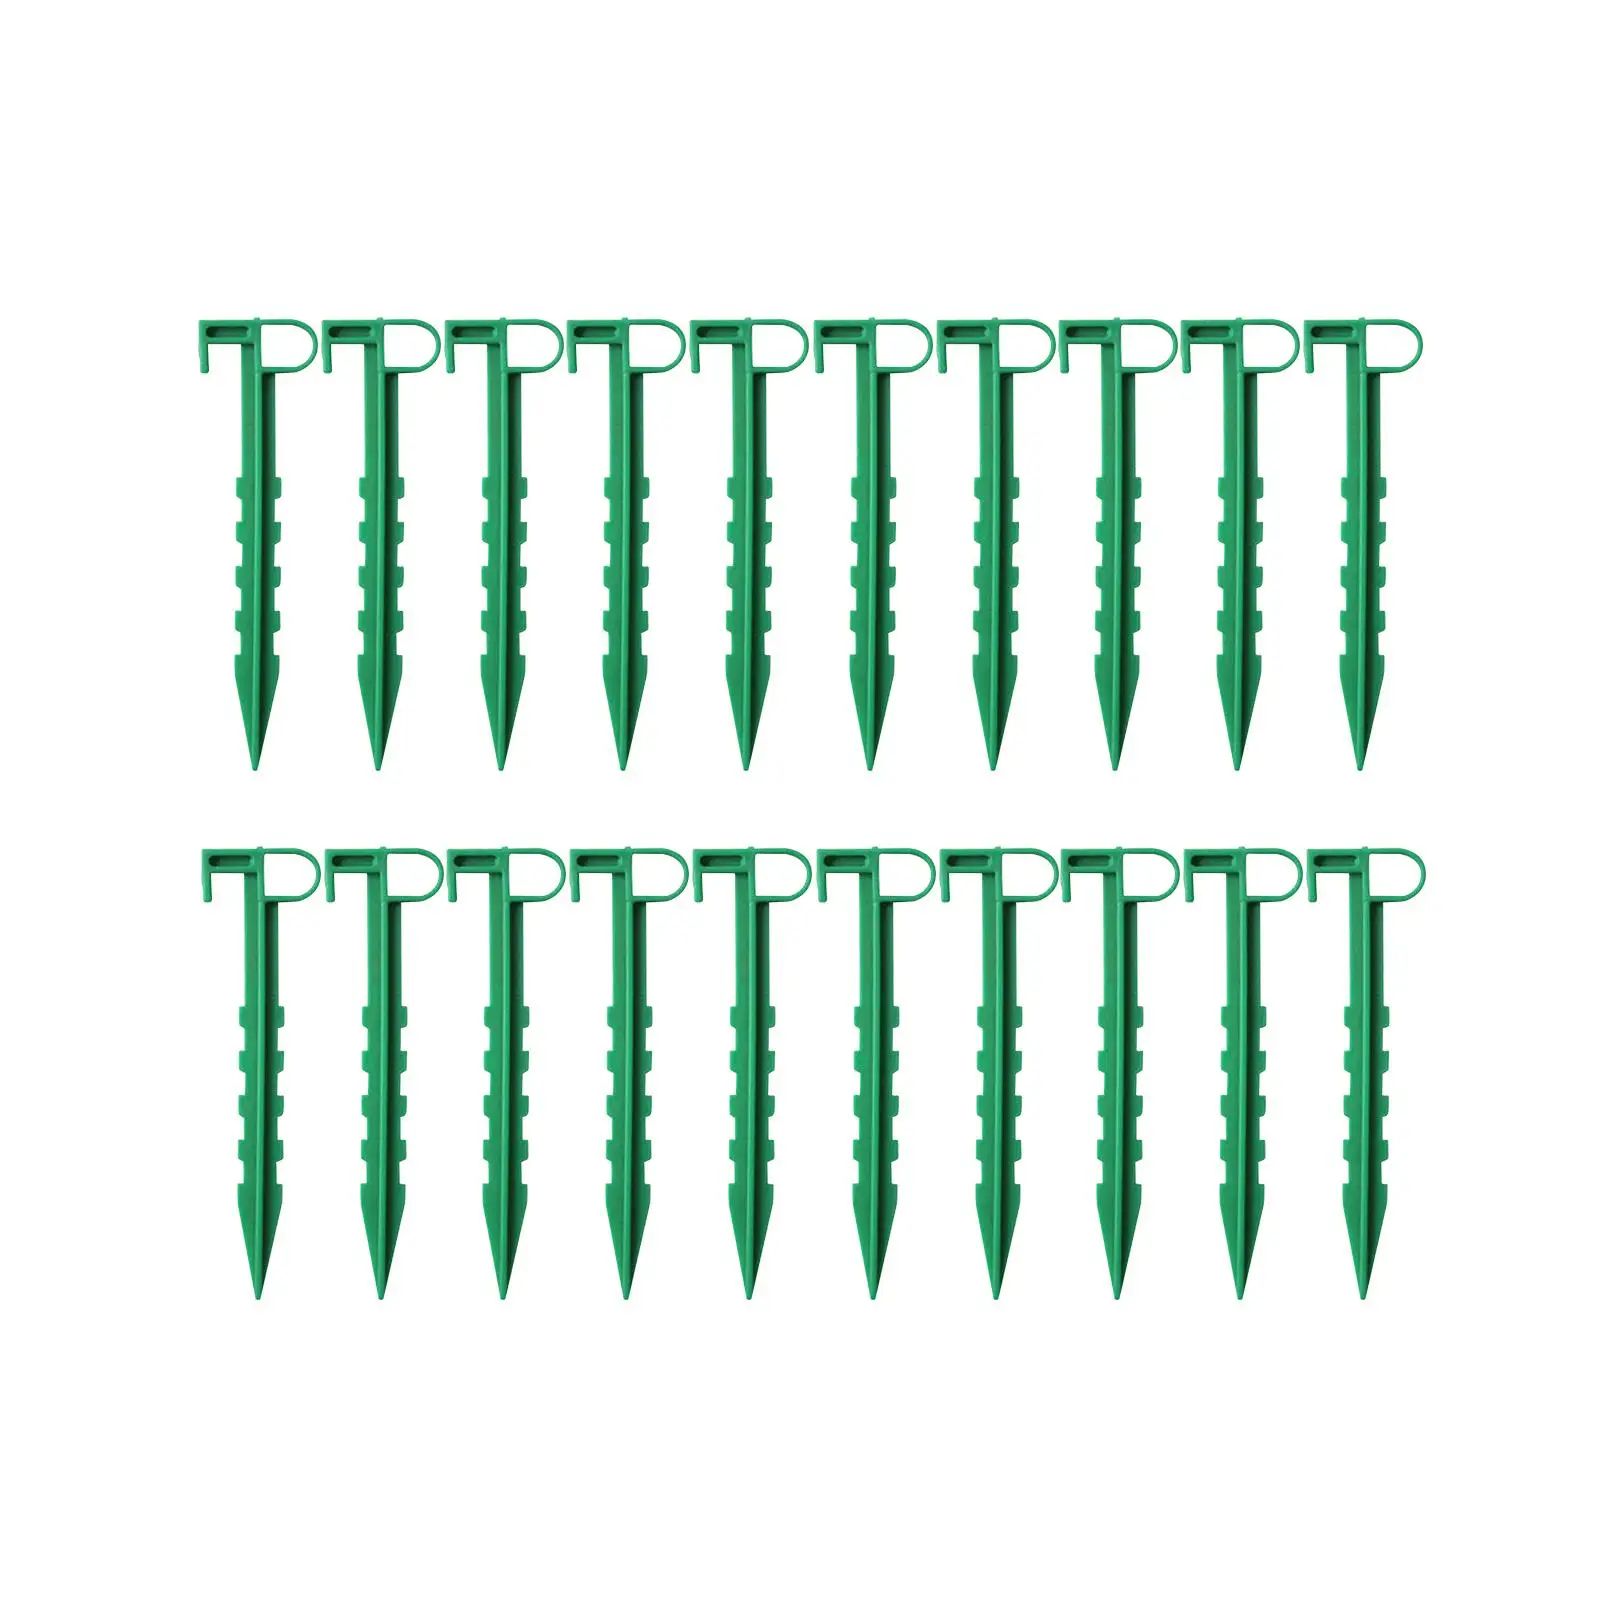 20Pcs Garden Stakes Garden Anchor Pegs for Fabric Lawn Edging Greenhouse Camping Keeping Garden Netting Down Holding Down Tents